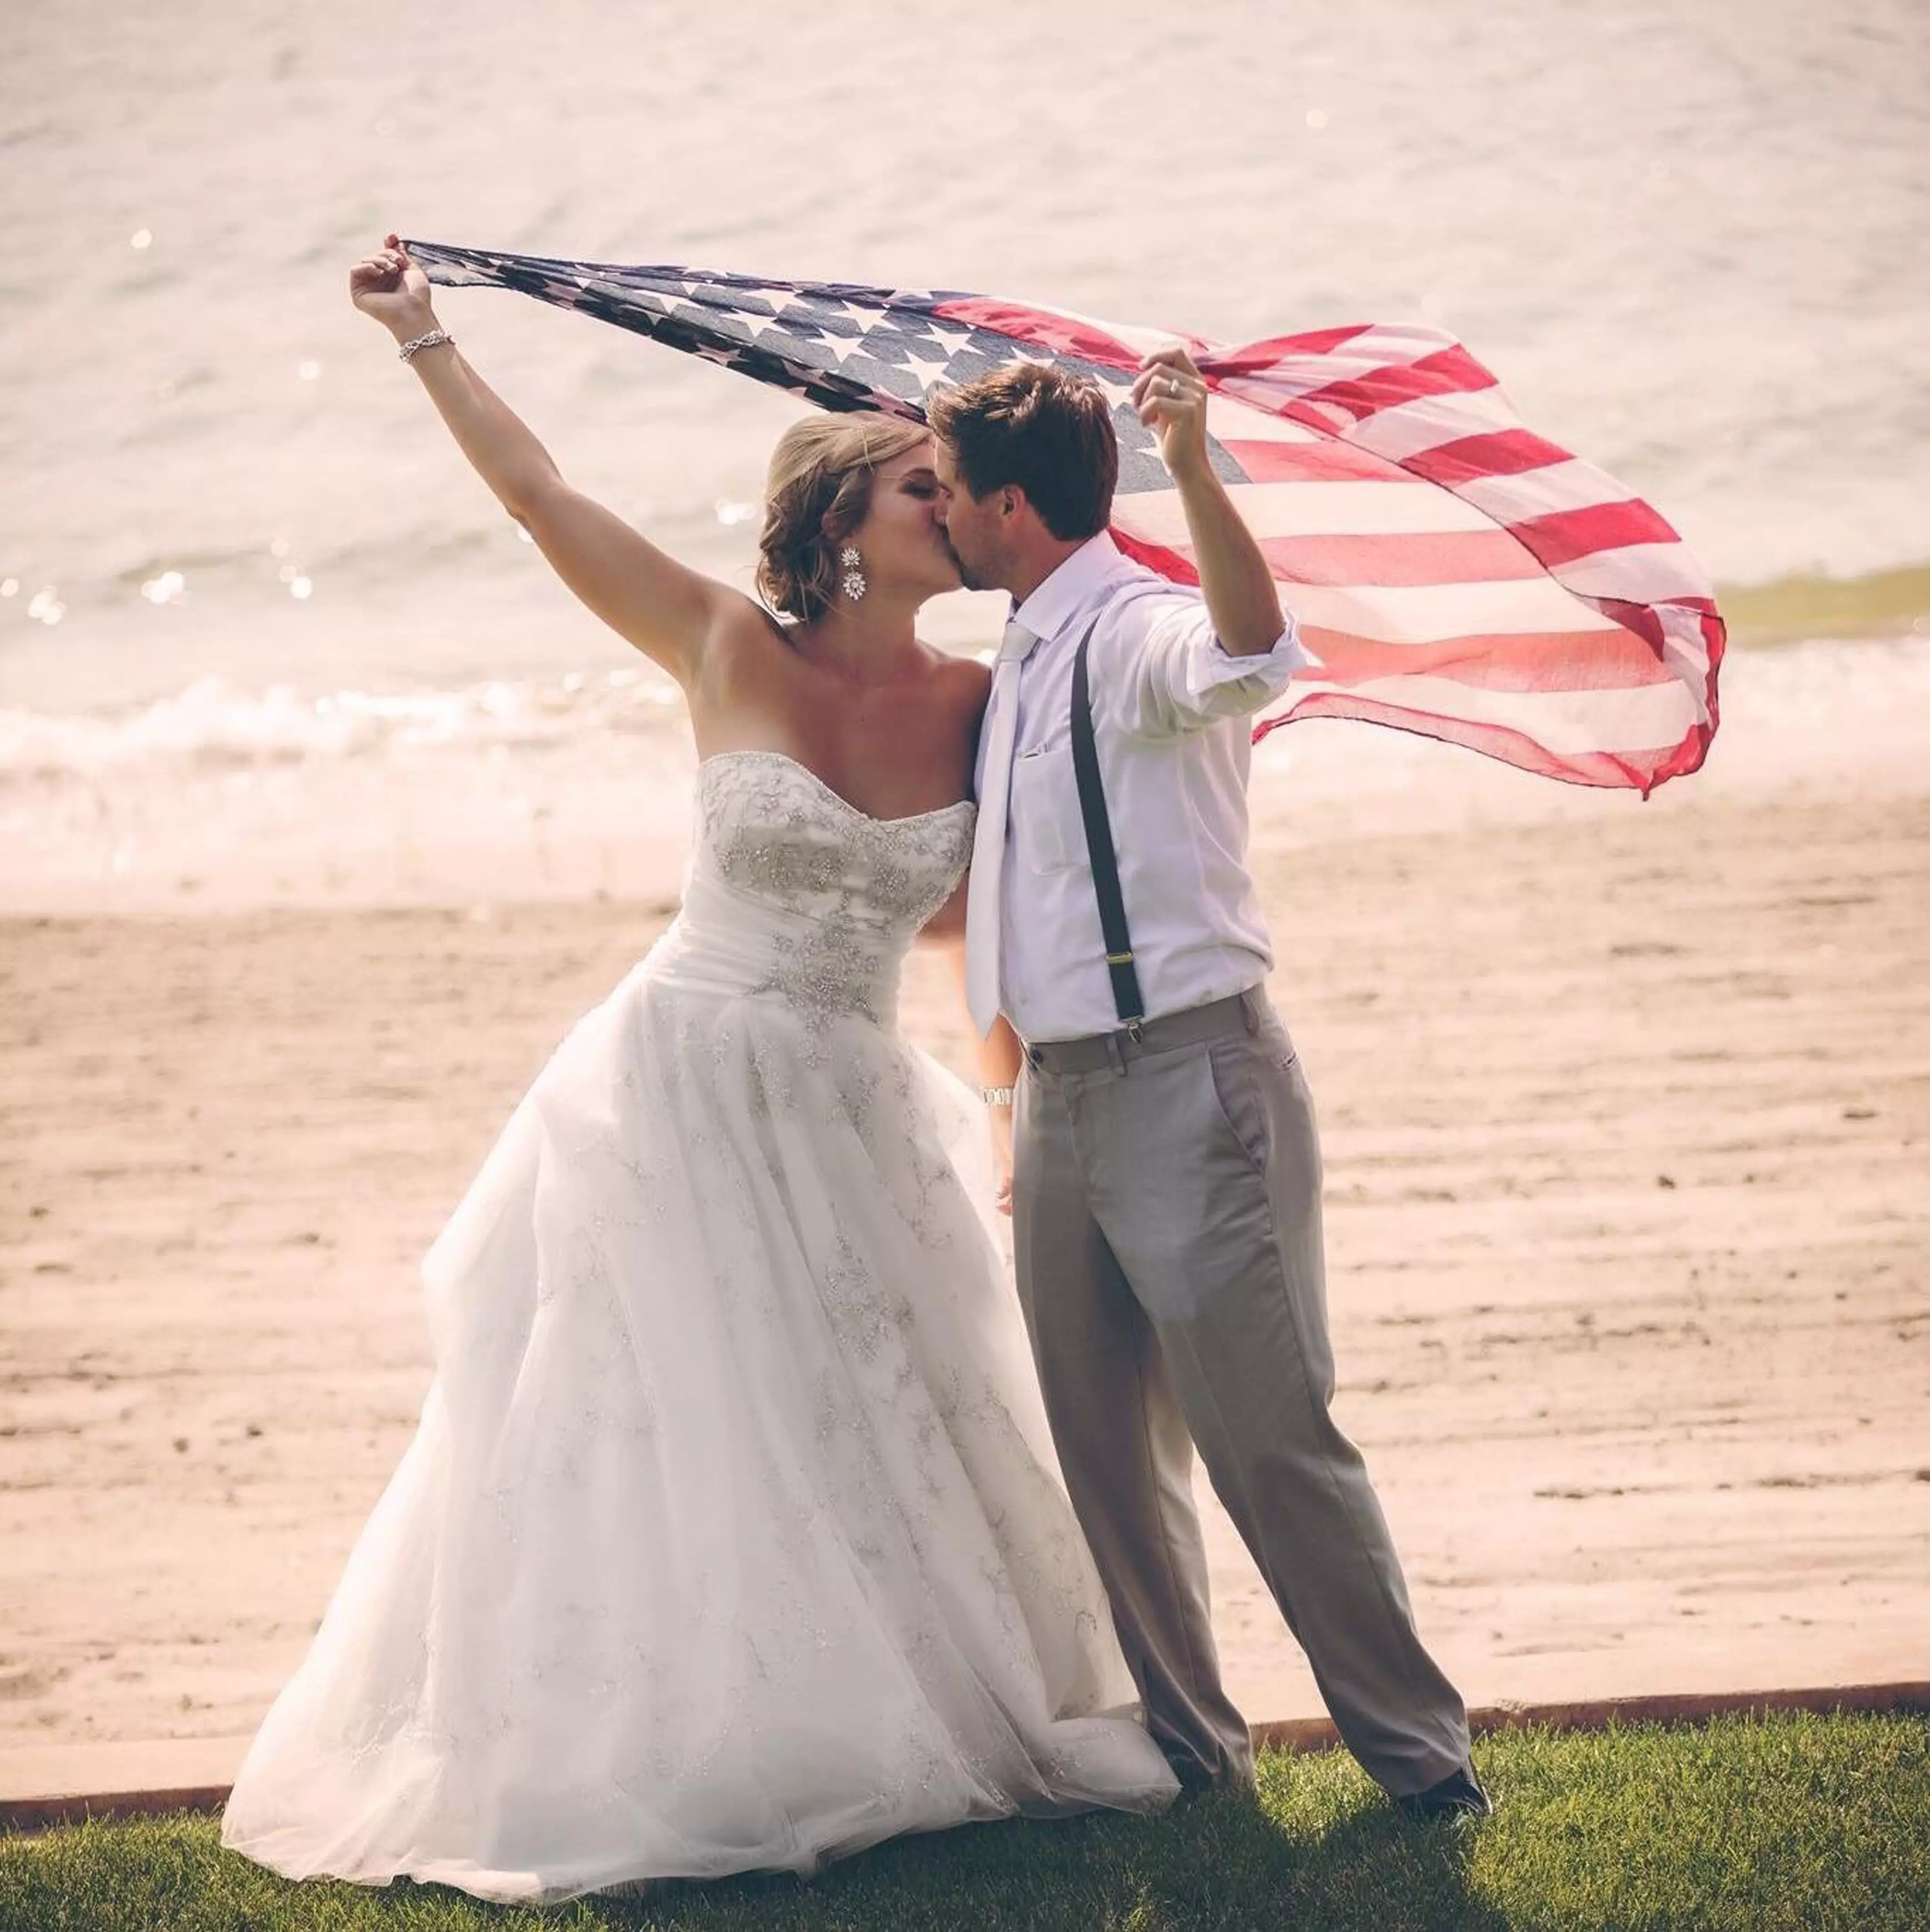 Katie wanted to recreate a photo from her wedding day, where she and Brett held a Union Jack flag.